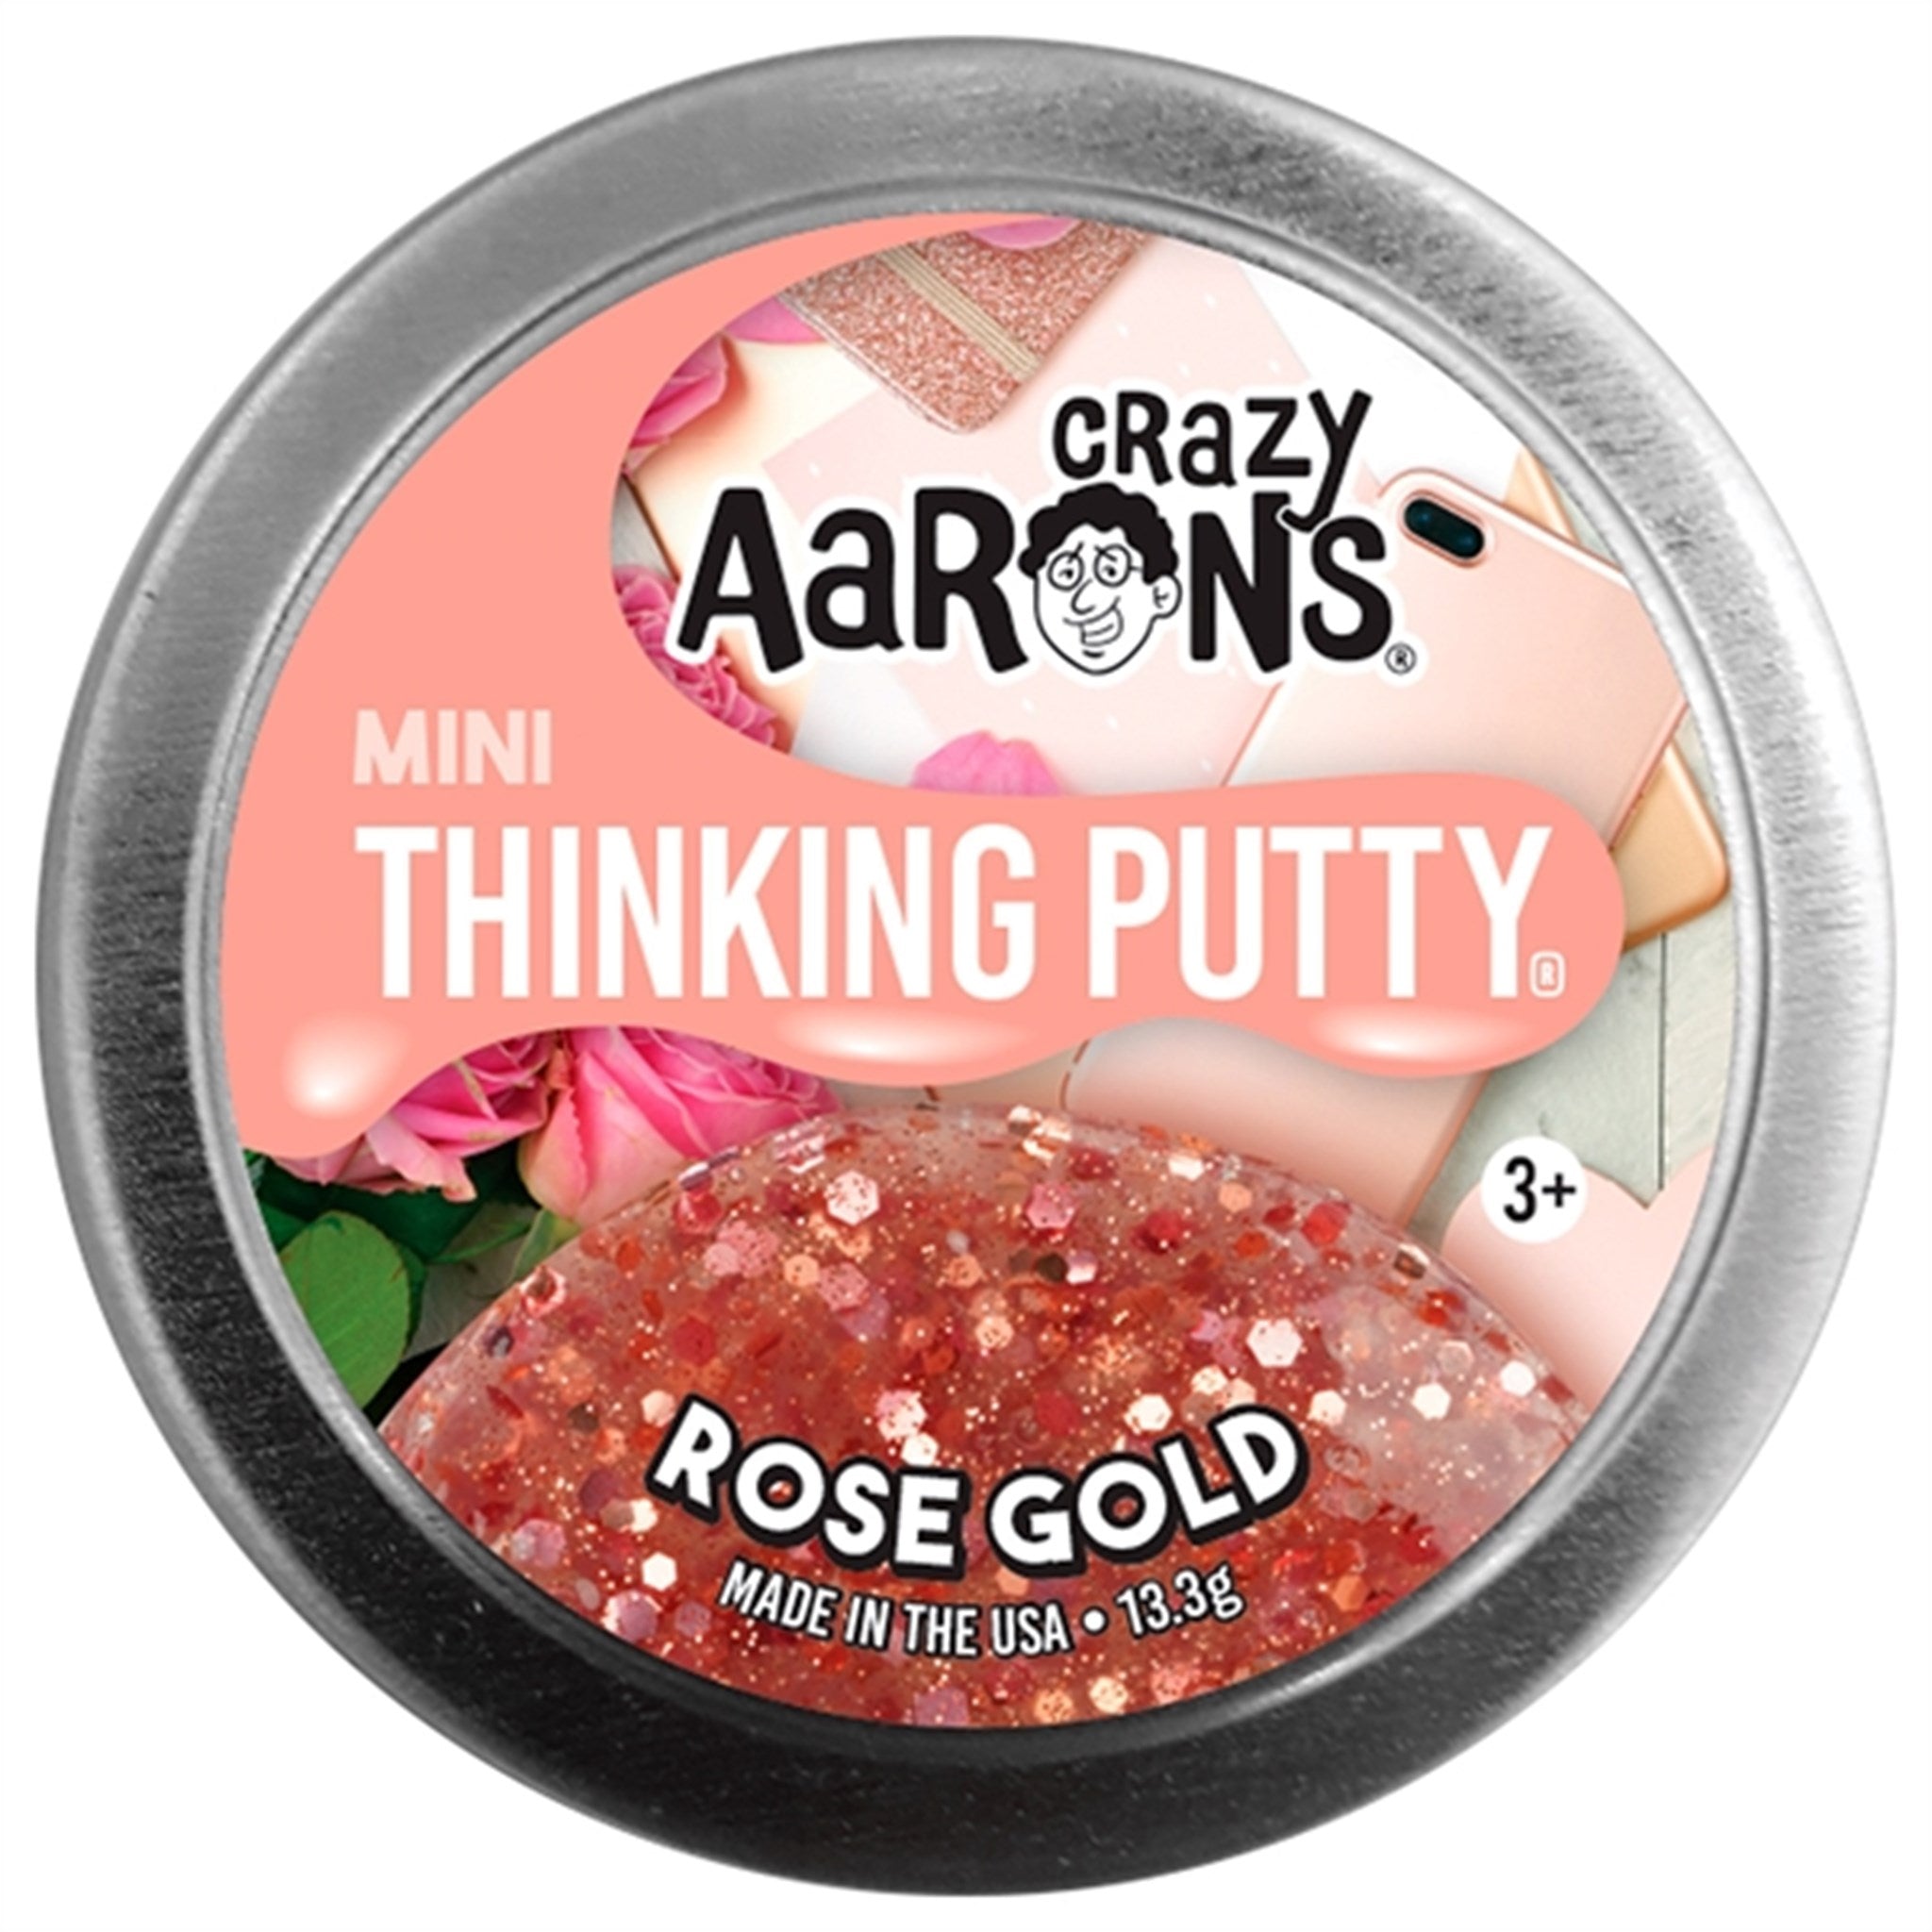 Crazy Aaron's® Thinking Putty Mini Tins - Rose Gold